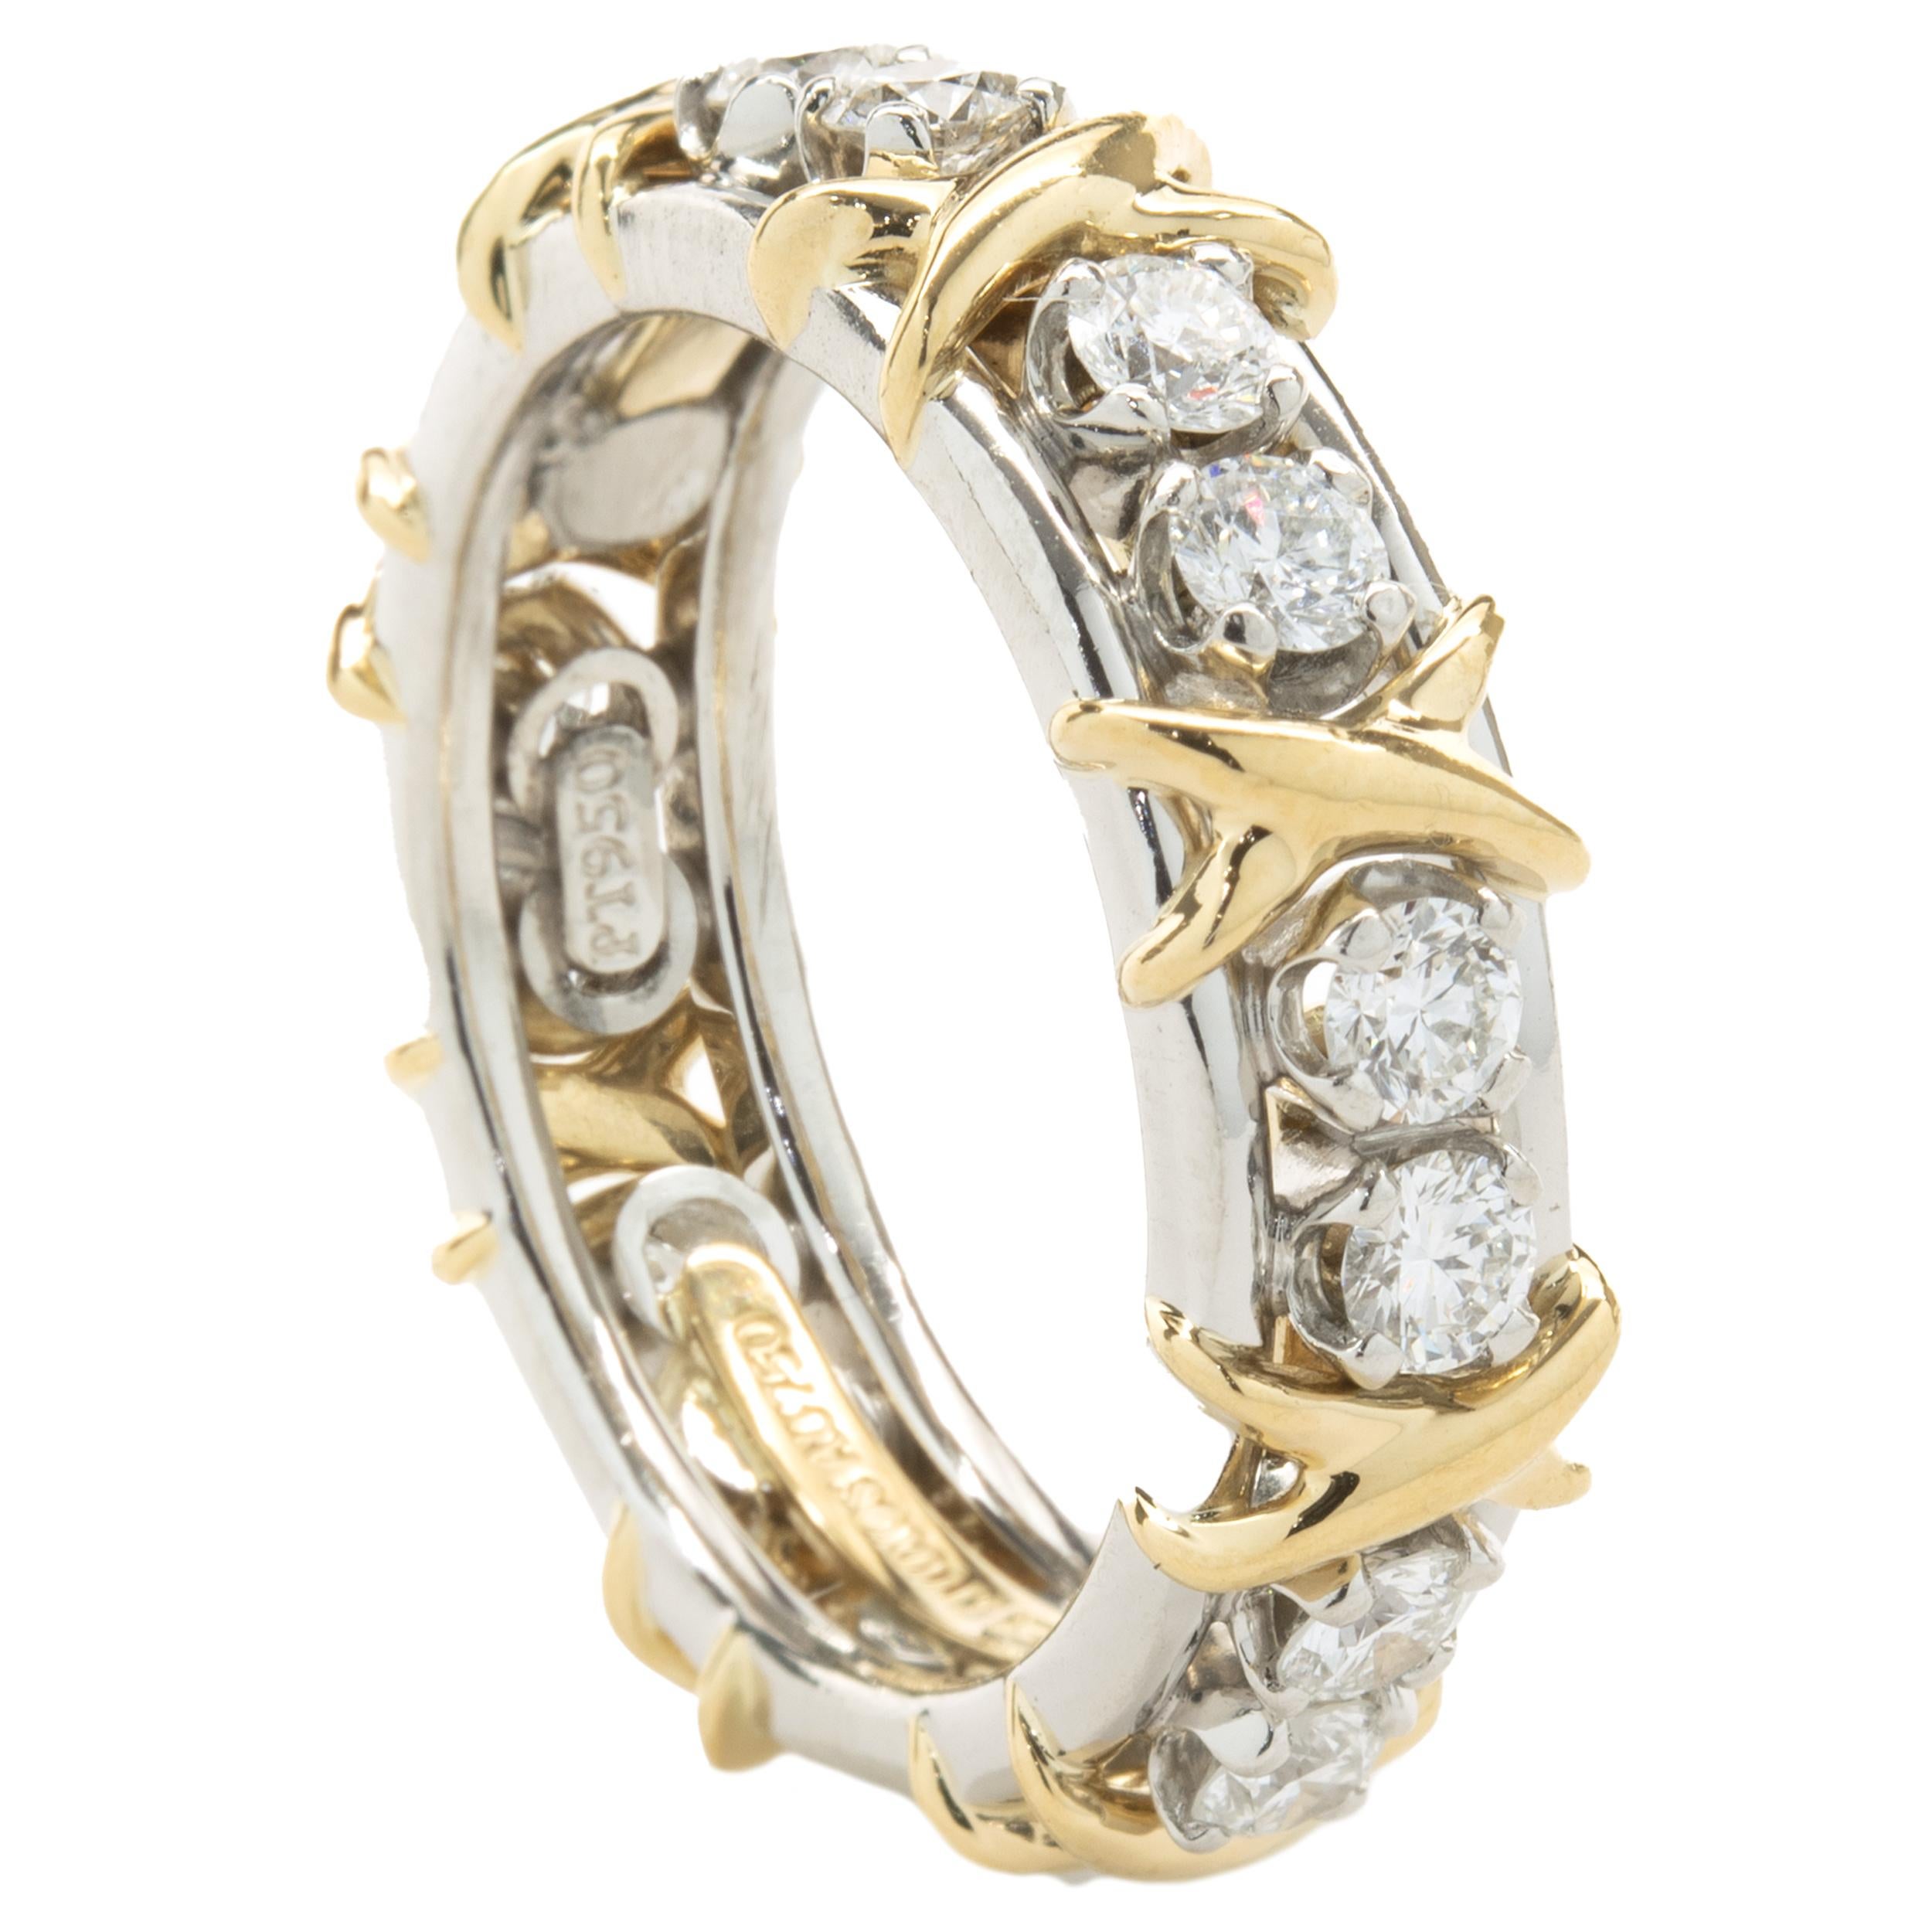 Designer: Tiffany & Co. / Schlumberger
Material: 18K yellow gold
Diamond: 16 round brilliant cut  = 1.14cttw
Color: F / G
Clarity: VS1-2
Dimensions: band measures 6.8mm wide
Size: 7
Weight: 9.65 grams